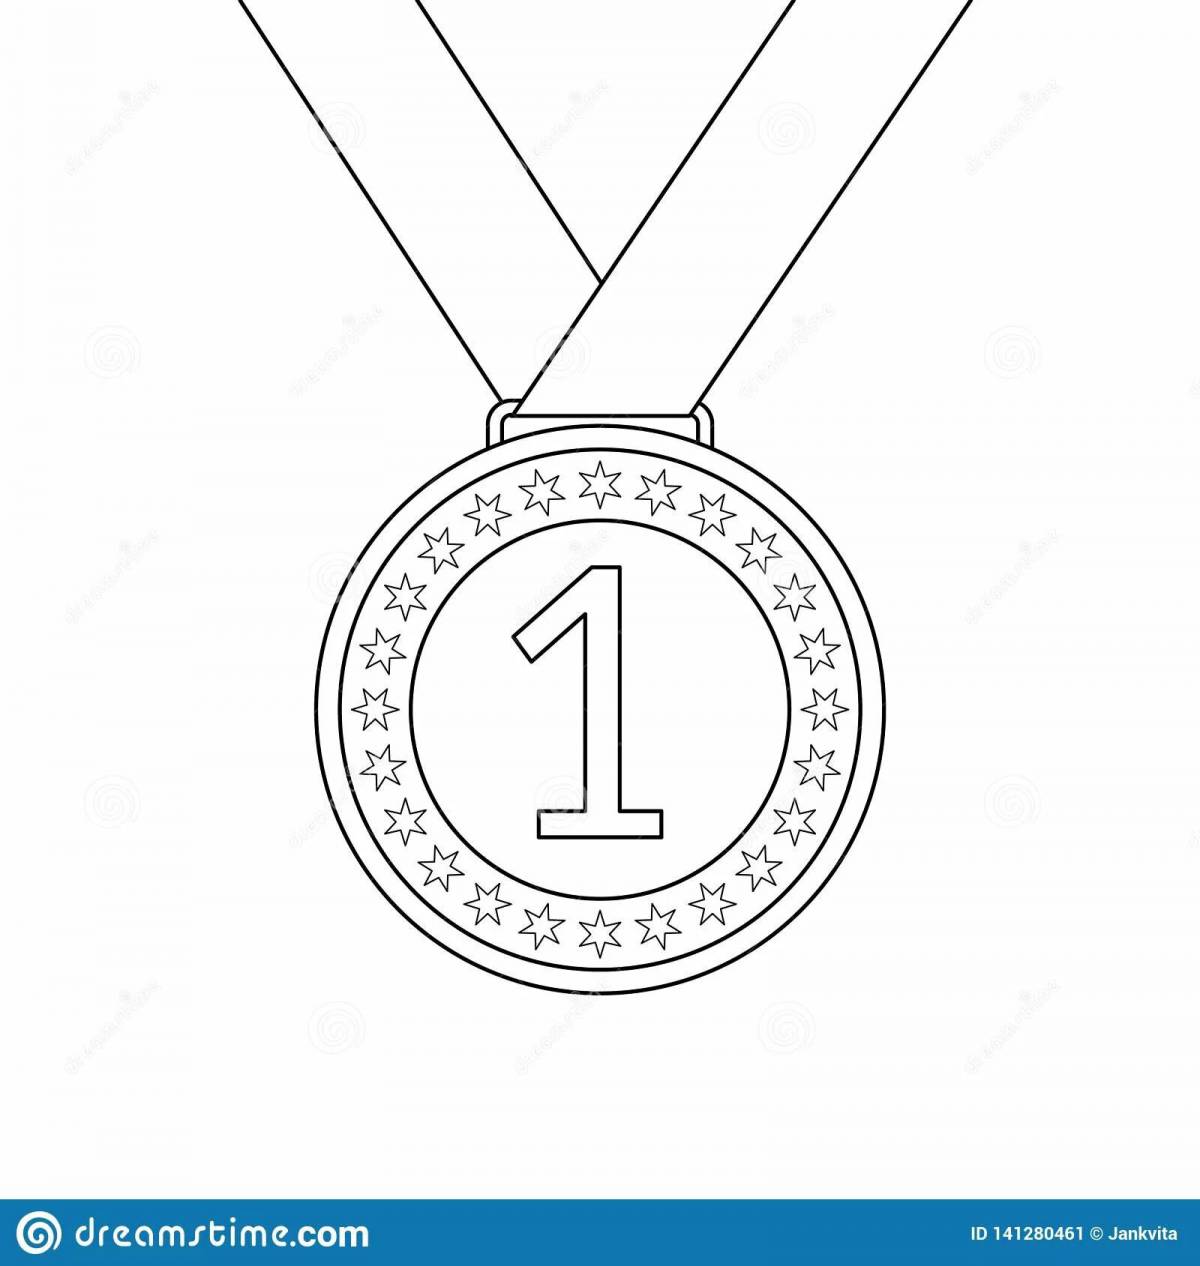 Colorful 1st place medal coloring page